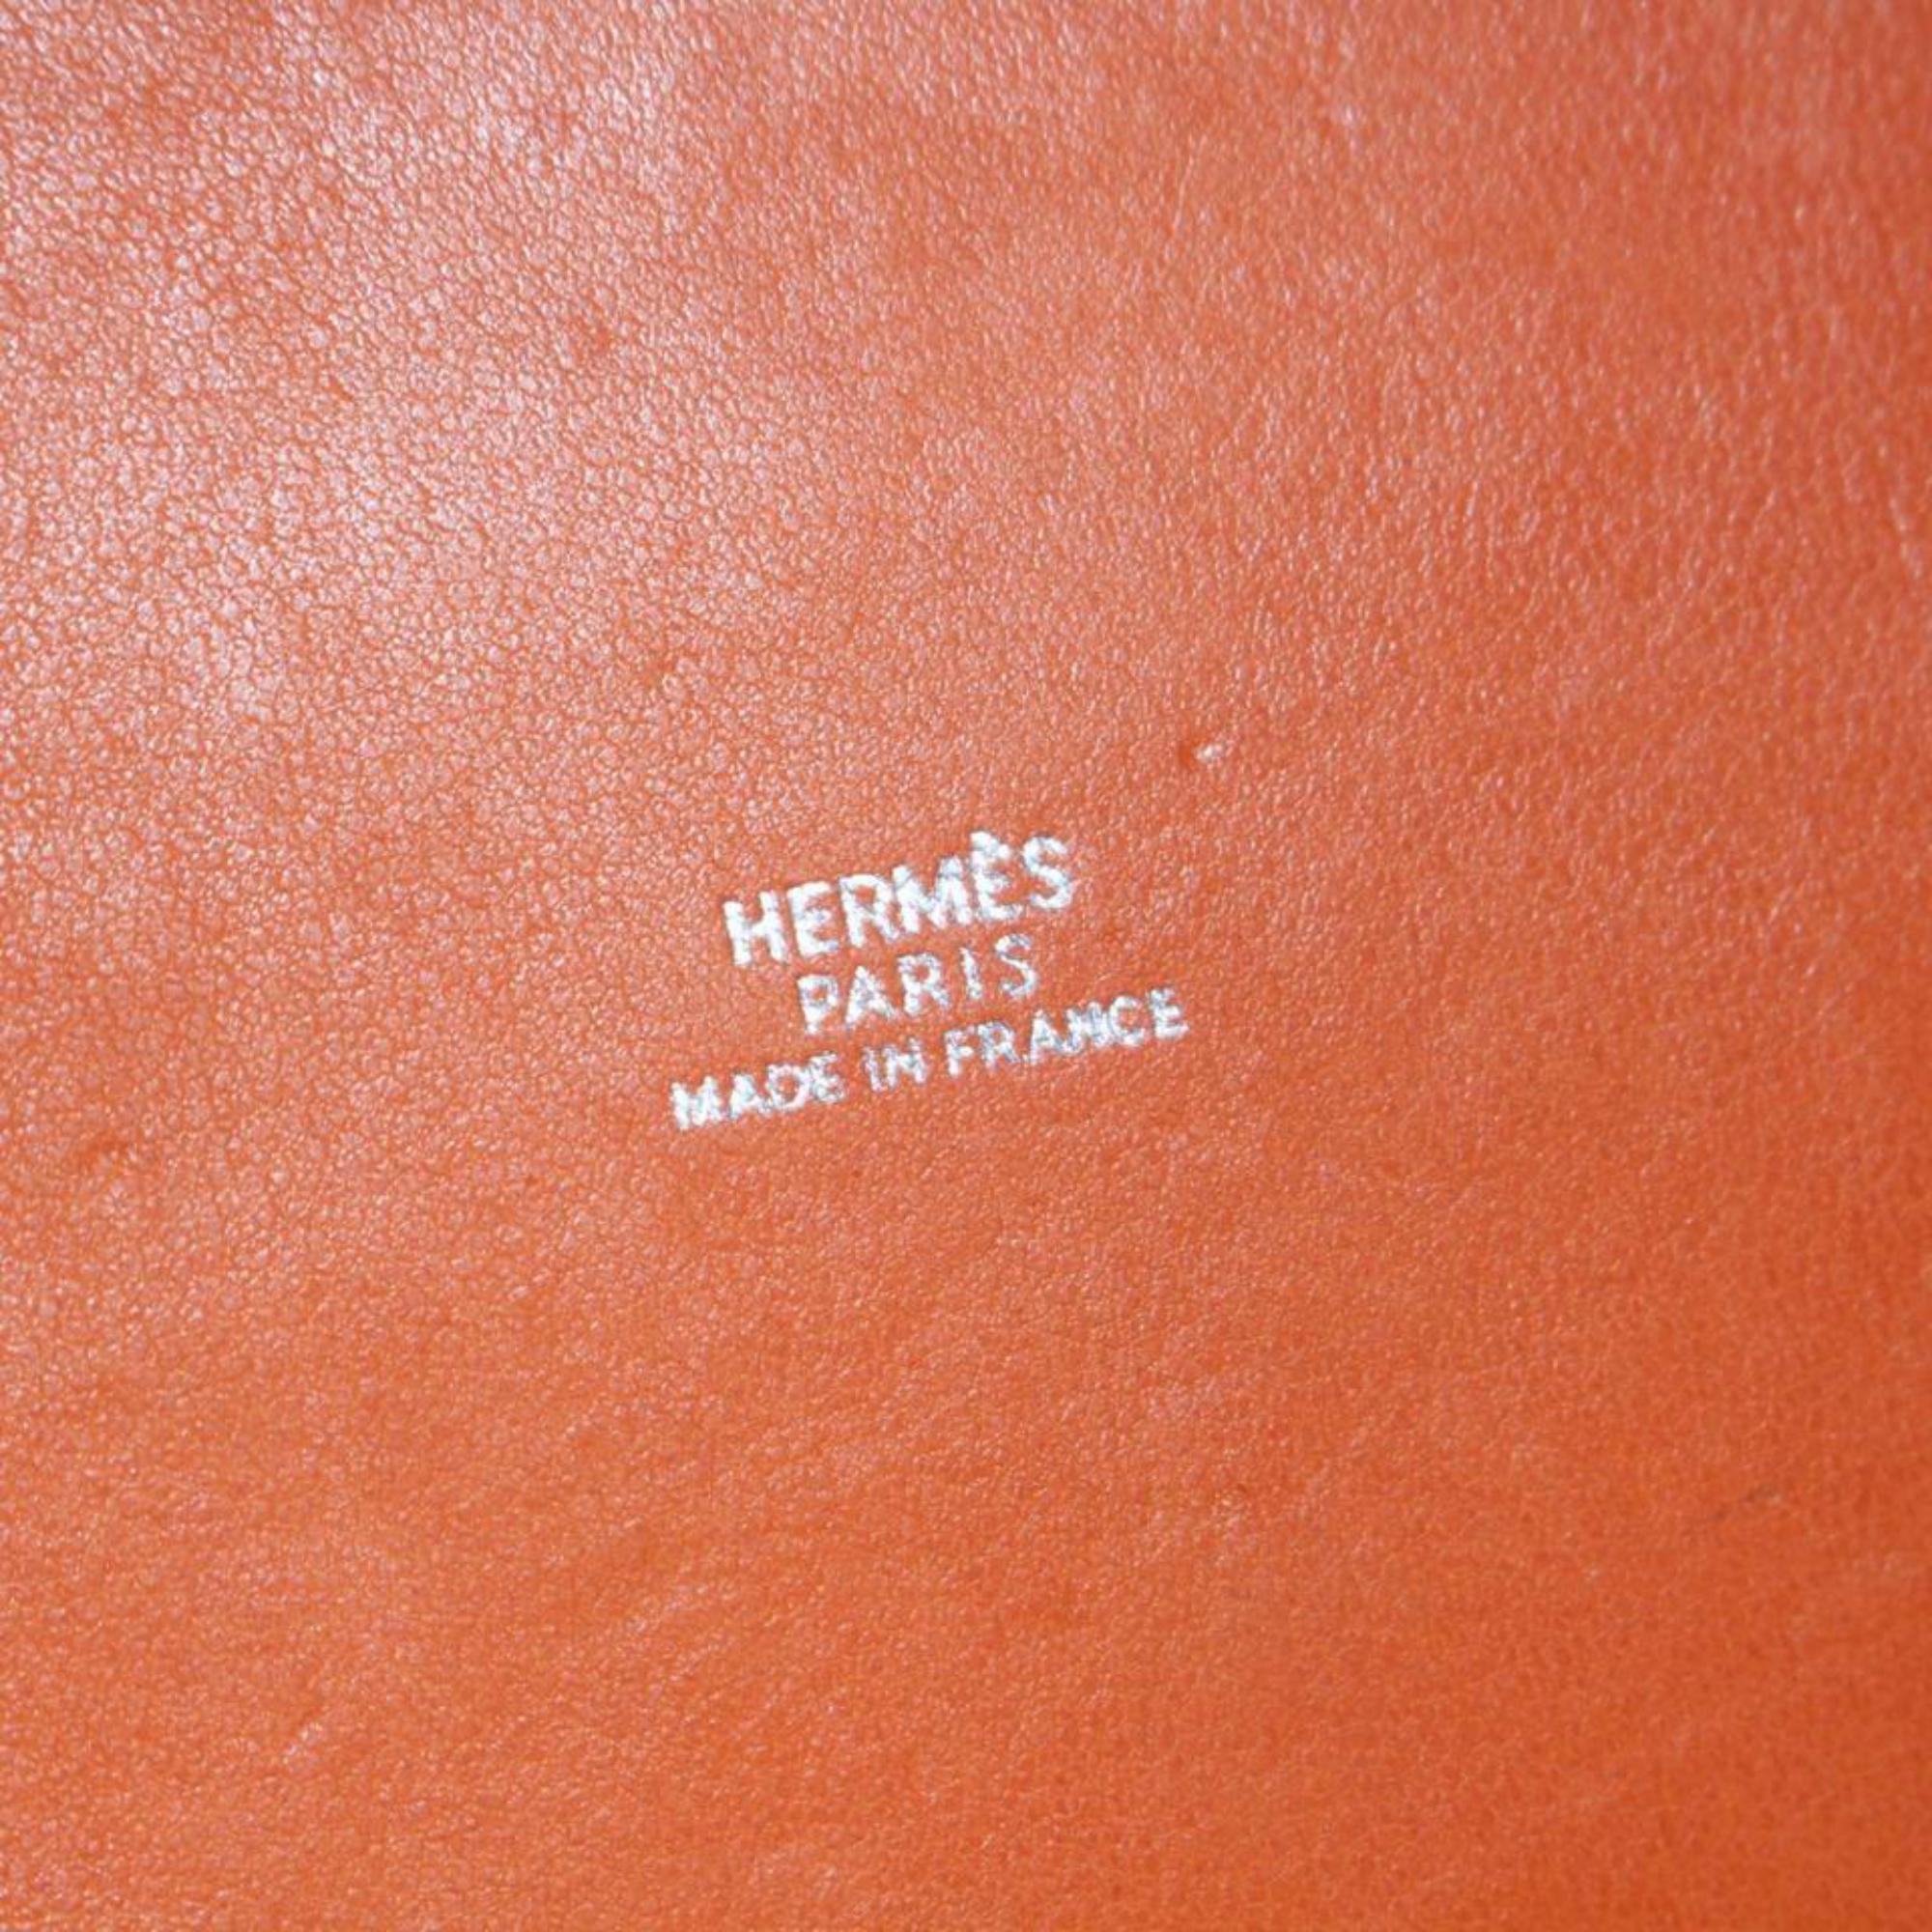 Hermès Picotin 18 Pm 868694 Orange Suede Leather Tote In Good Condition For Sale In Forest Hills, NY